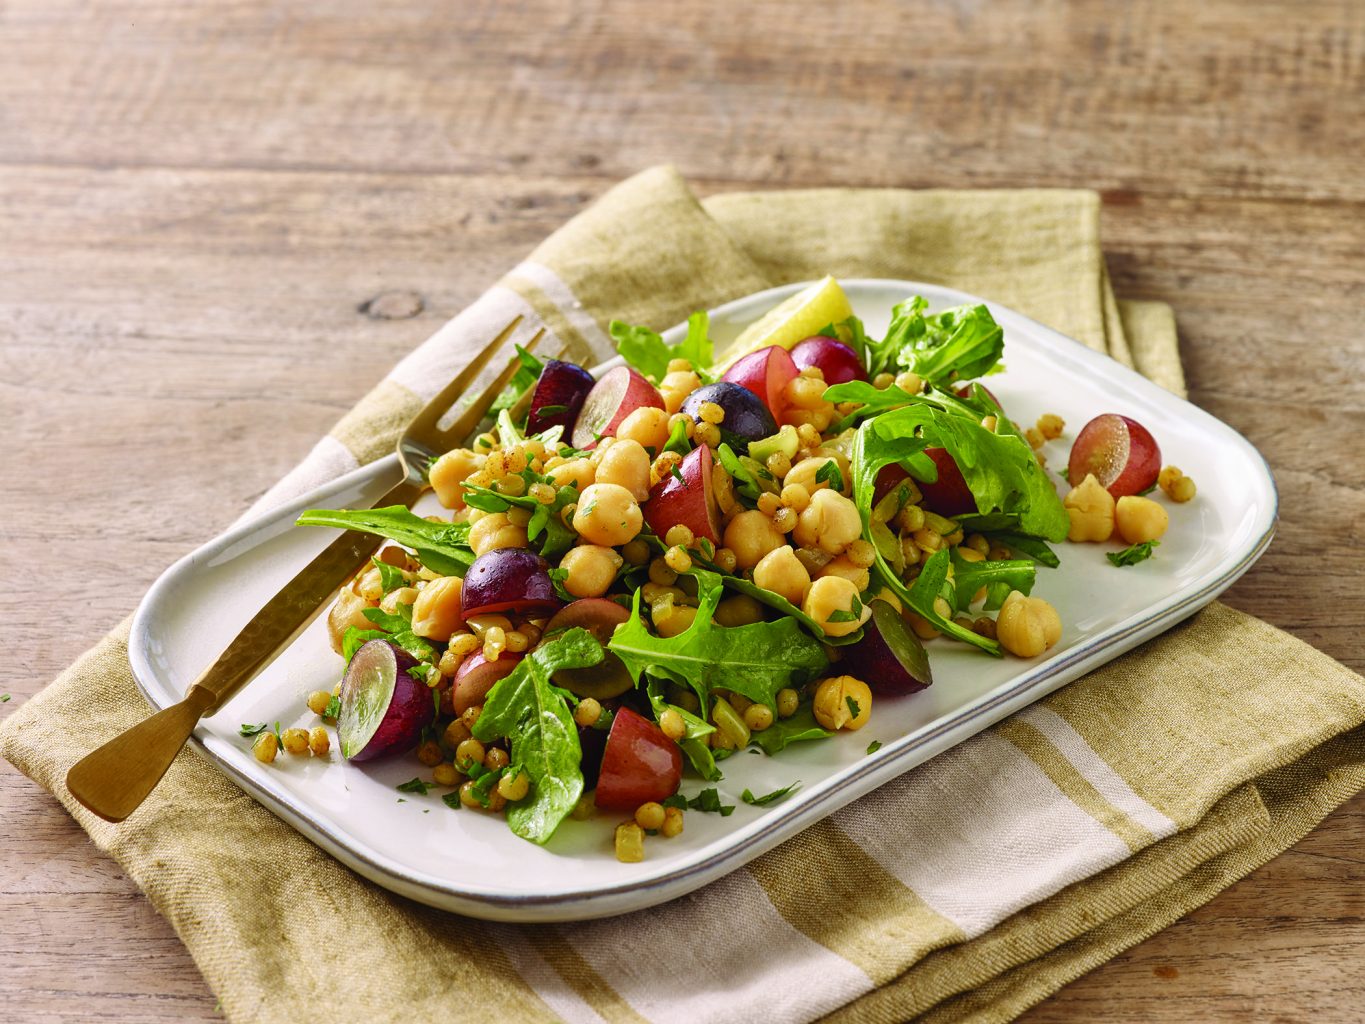 Chickpea and grapes salad